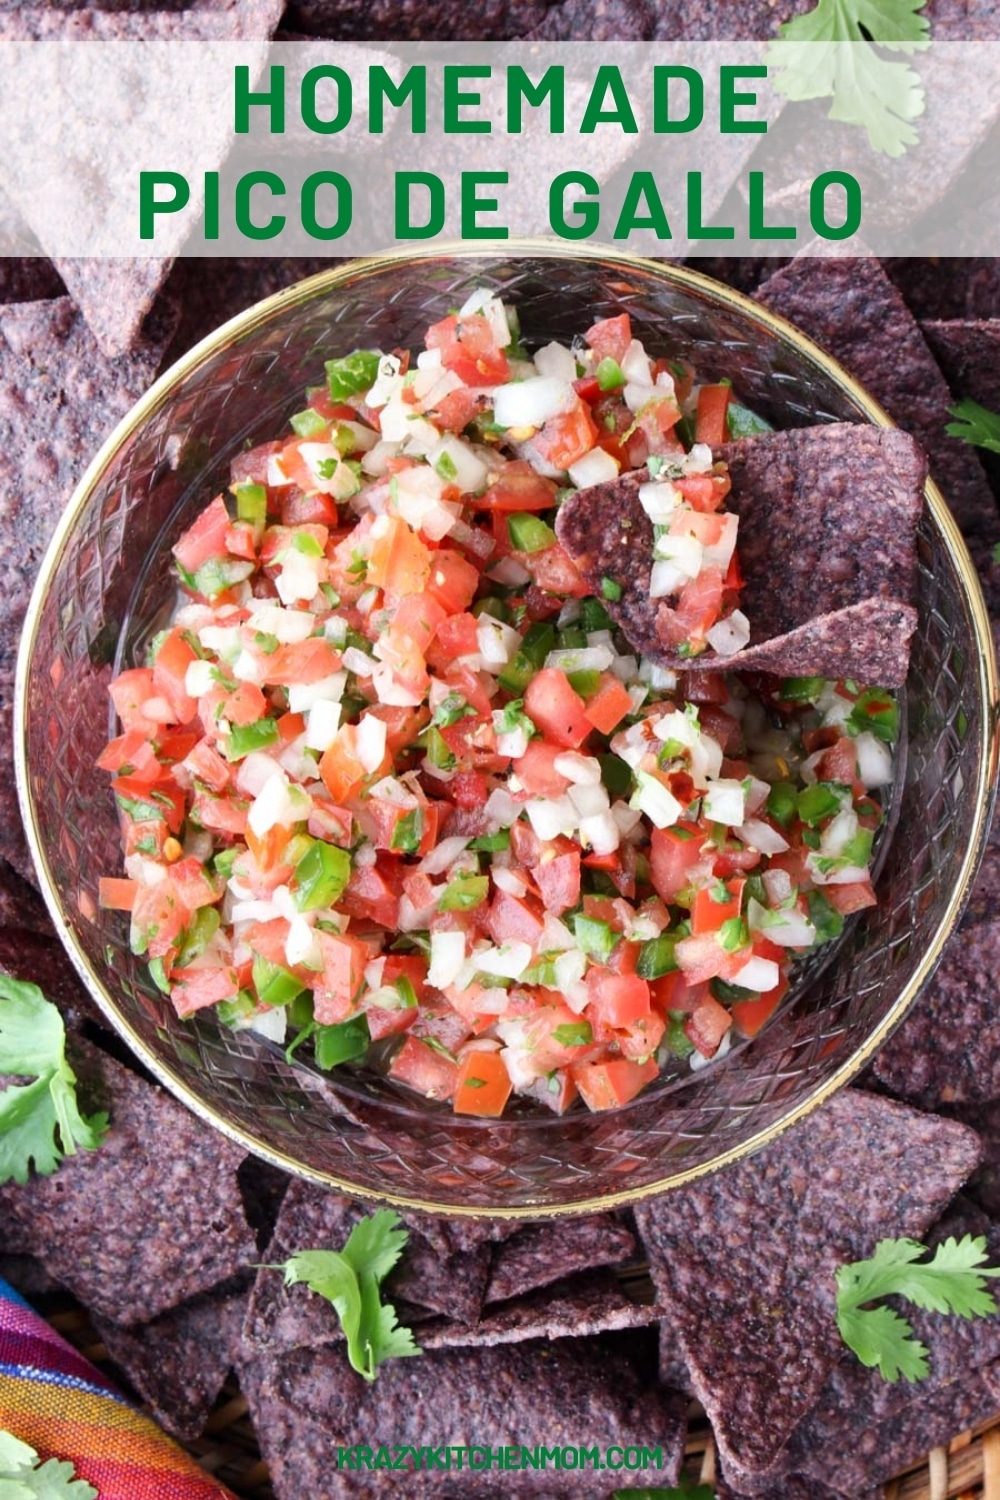 A traditional bright, fresh Mexican salsa bursting with fresh flavor from ripe tomatoes to the heat of jalapeños and tang of fresh lime. via @krazykitchenmom